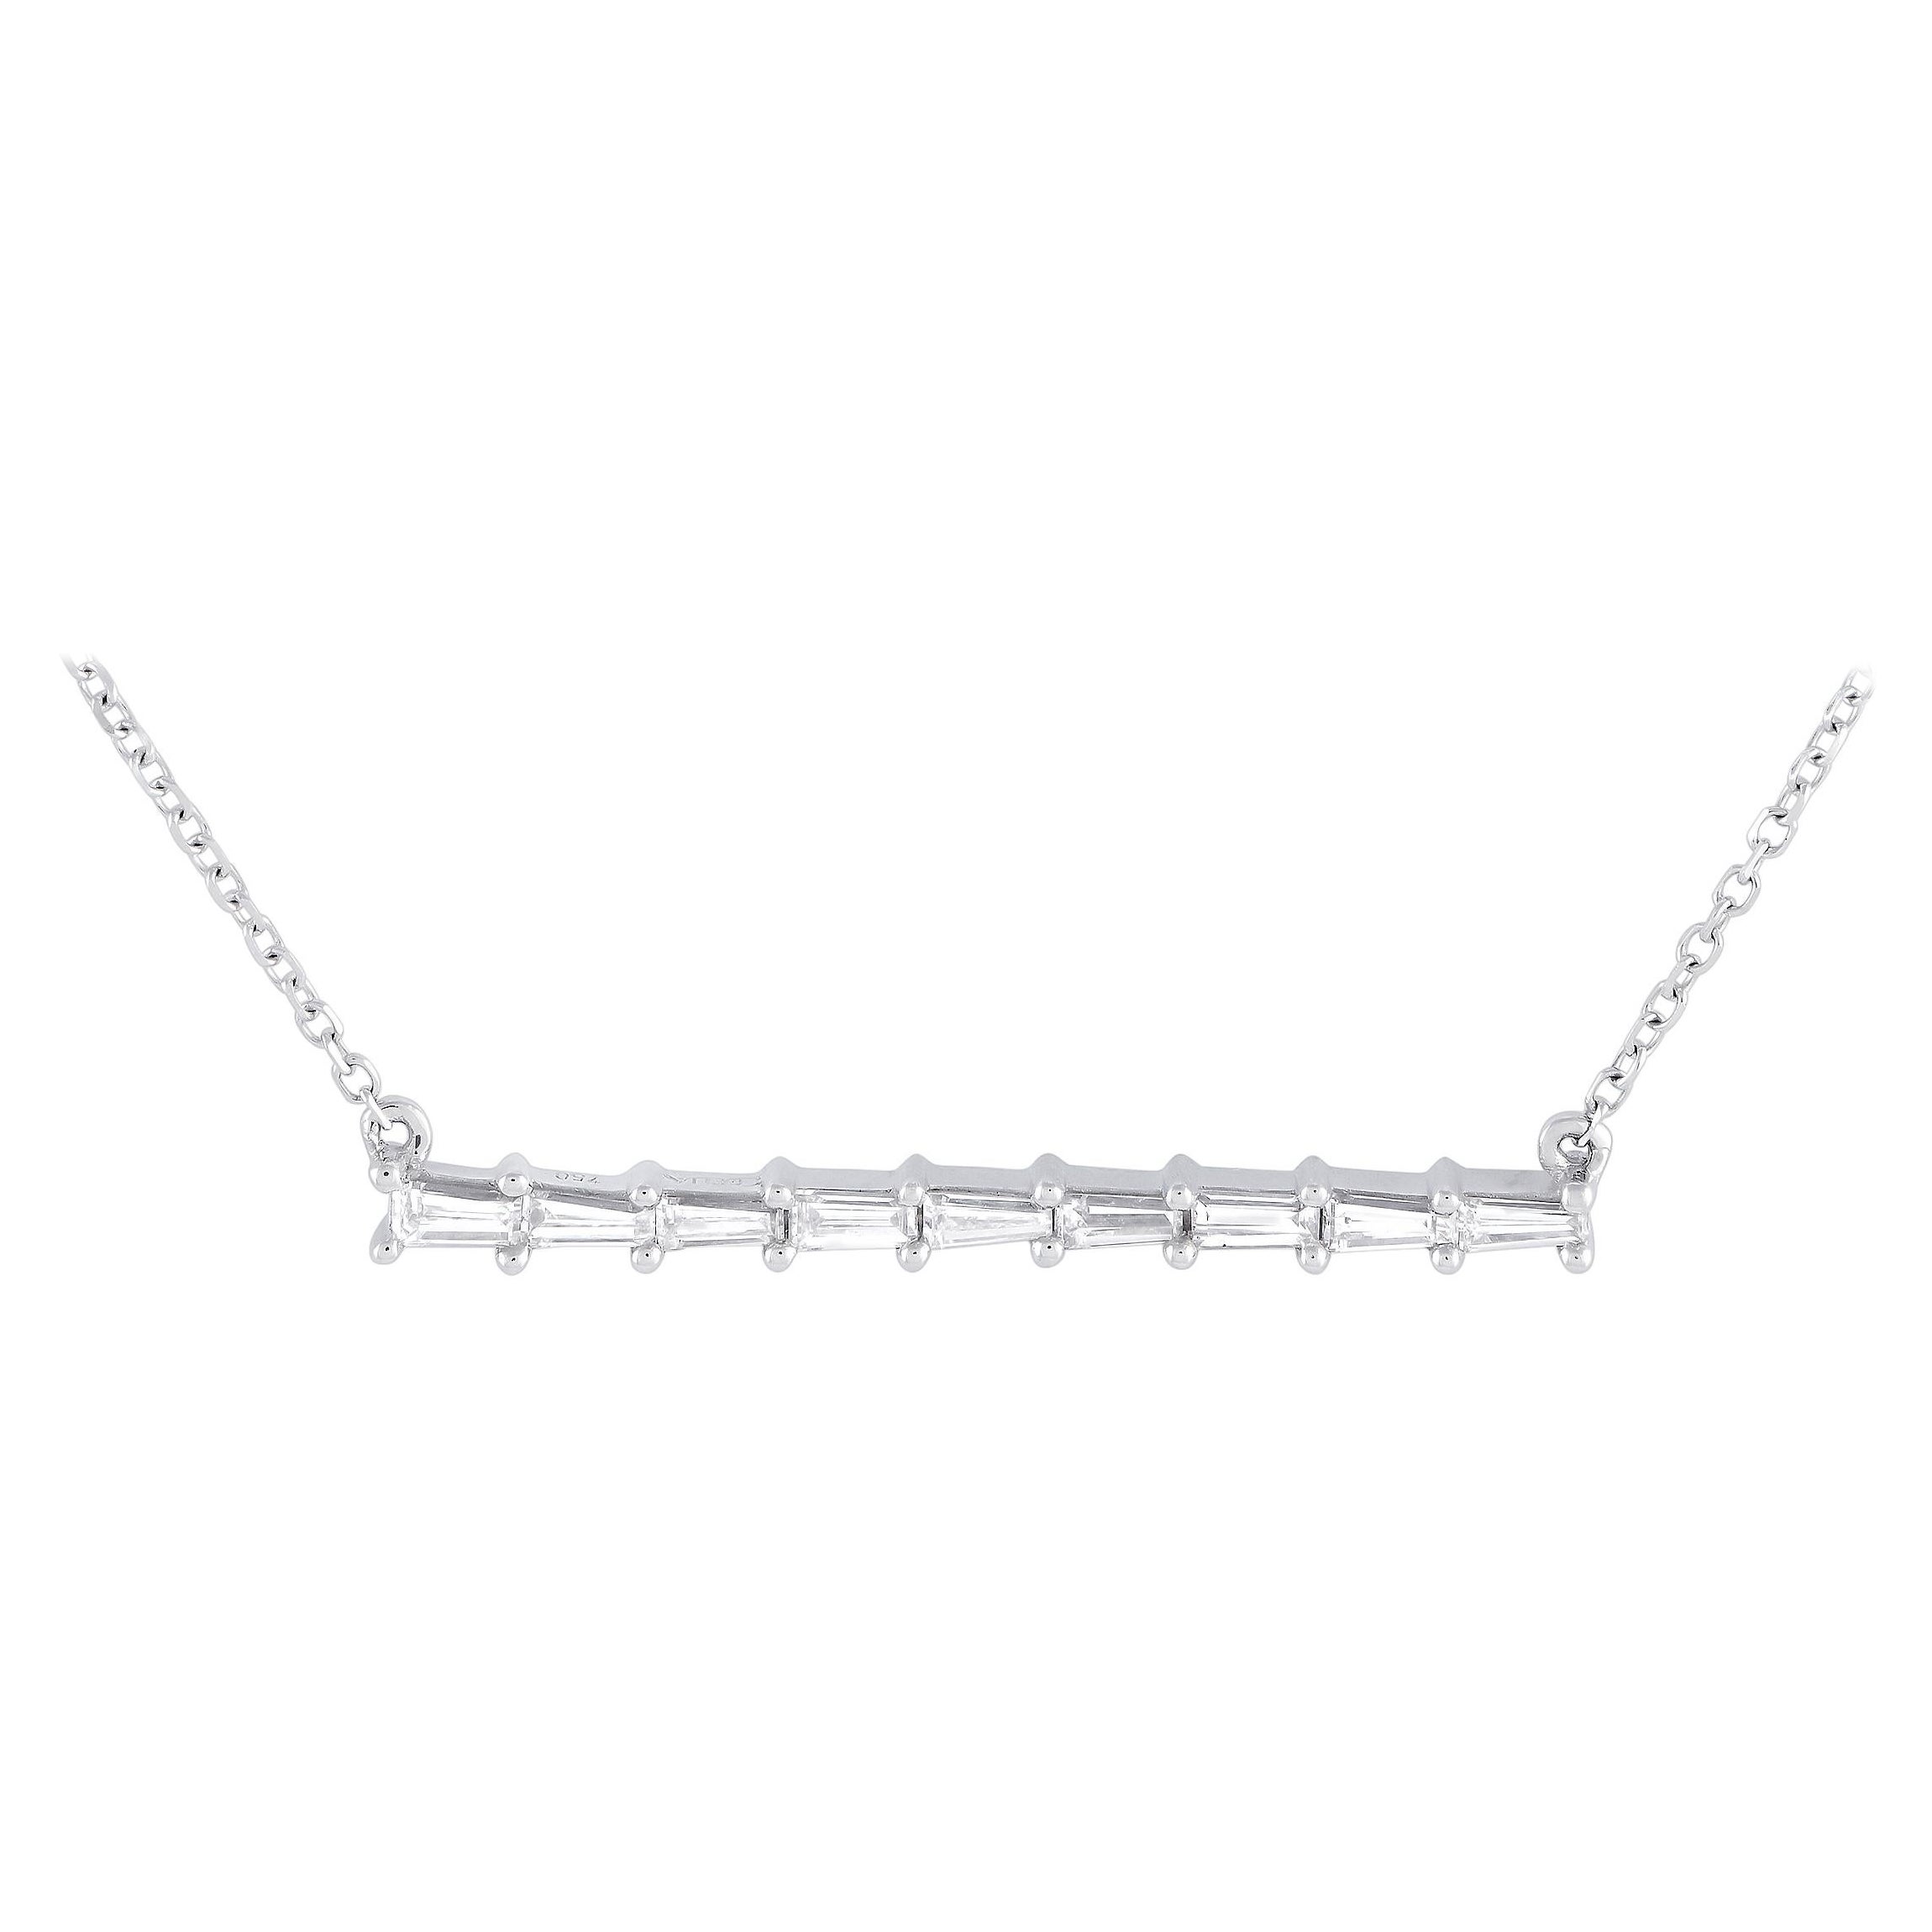 LB Exclusive 18k White Gold 0.33 Carat Diamond Tapered Baguette Bar Necklace For Sale